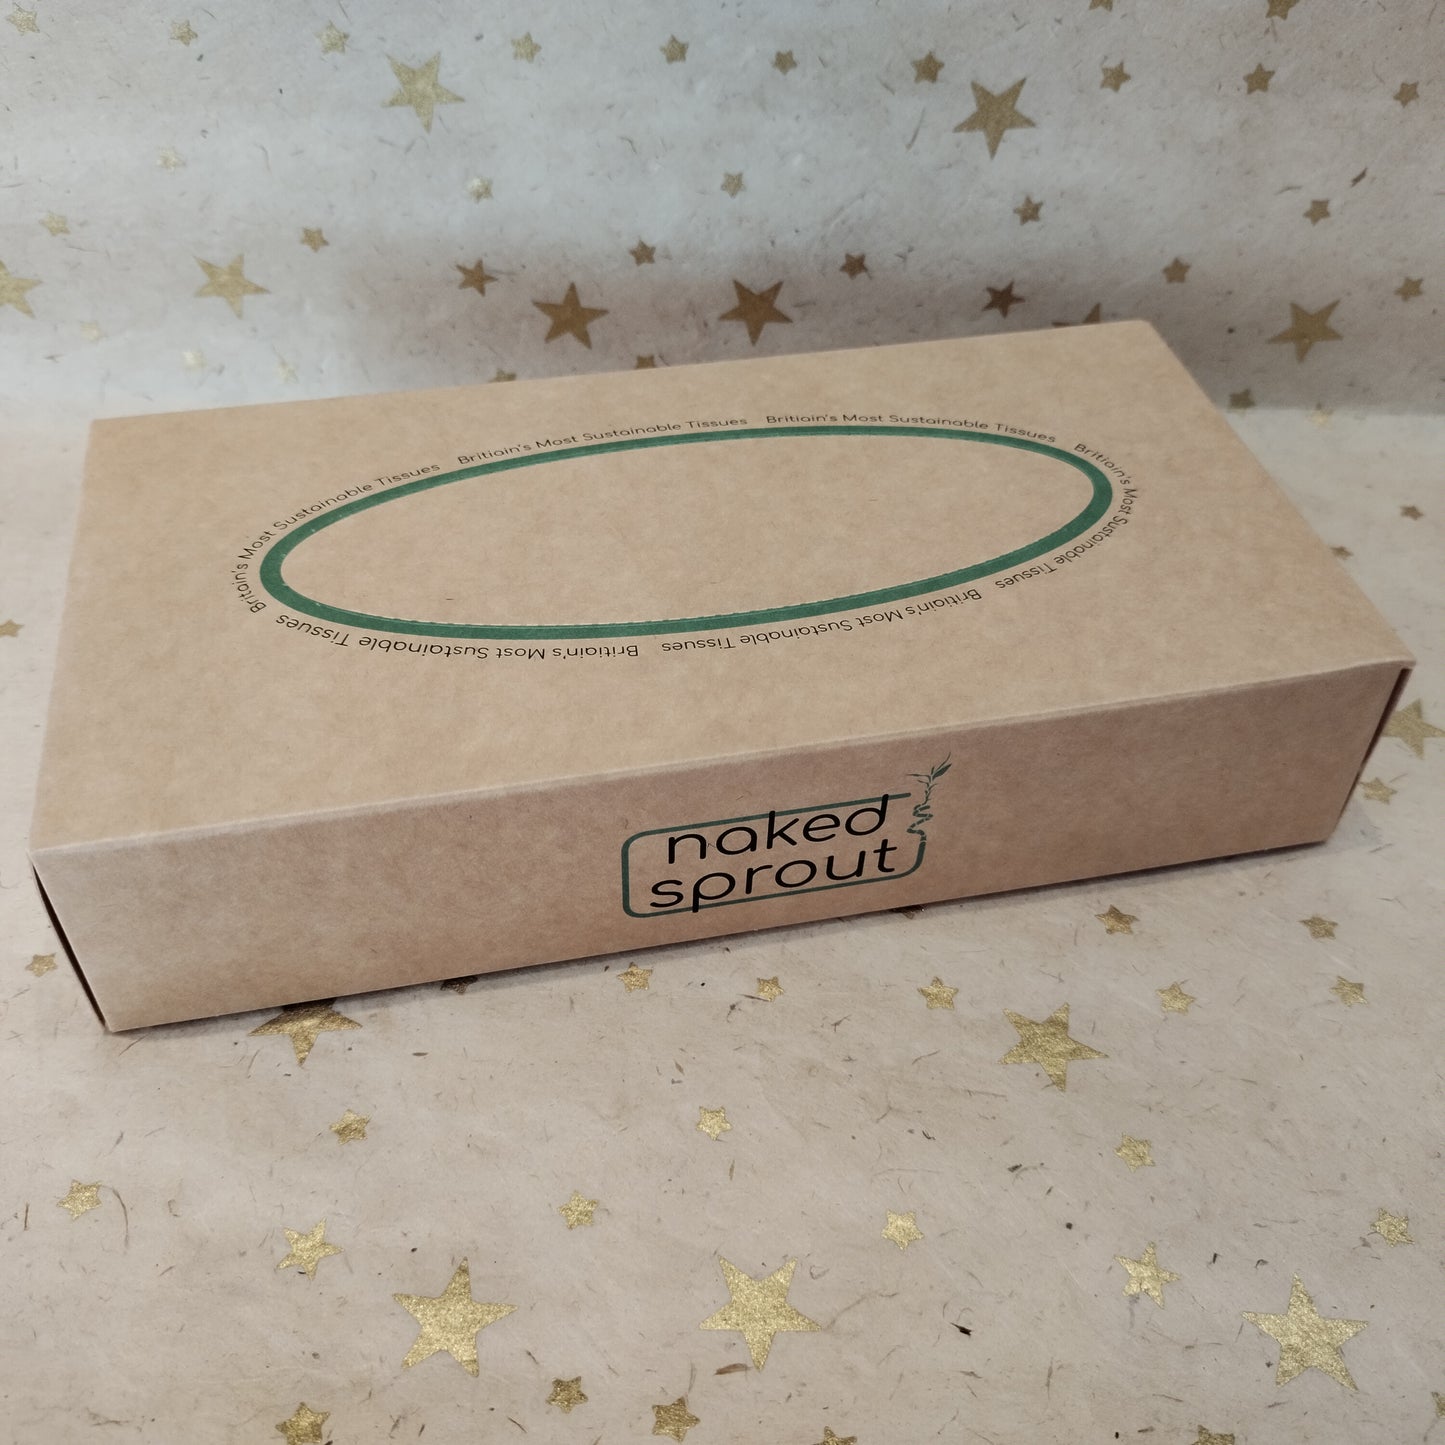 Naked Sprout Box of Tissues